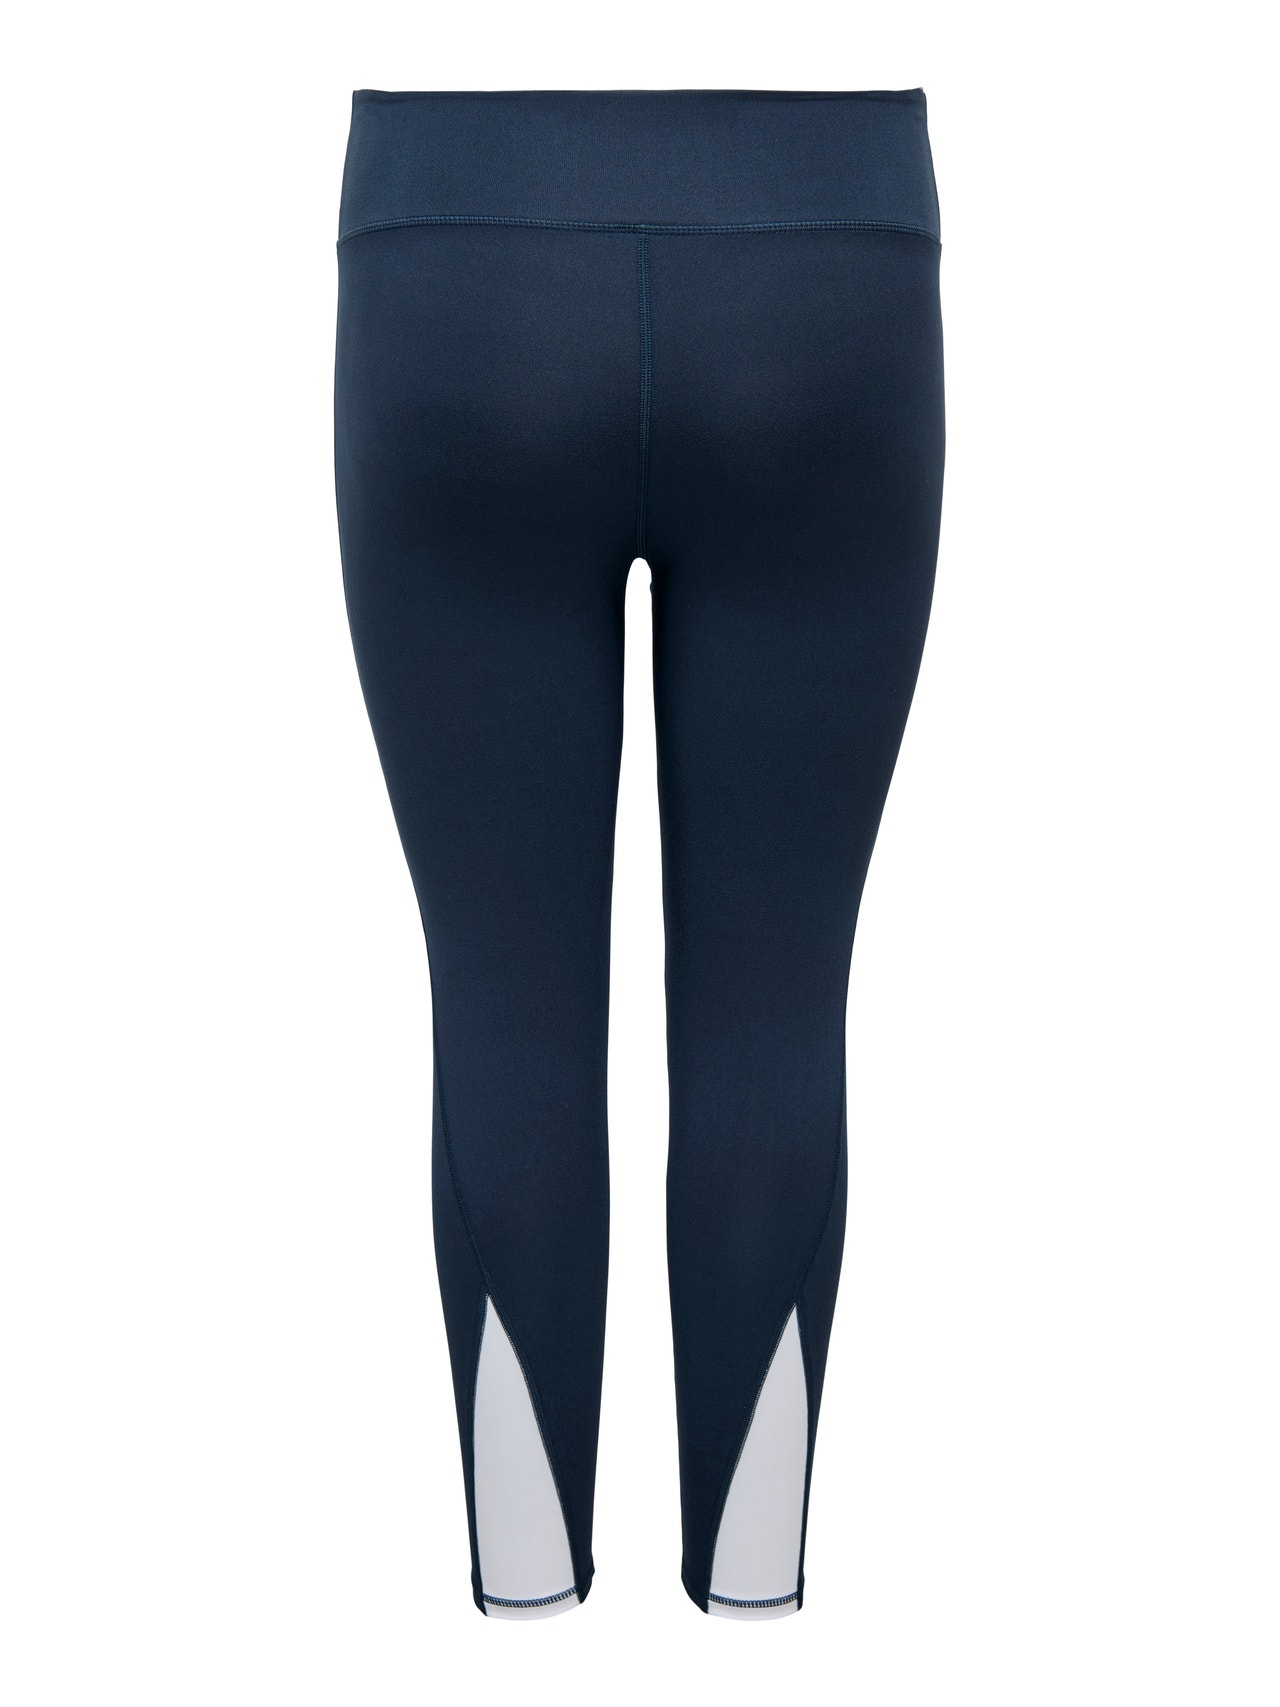 ONLY Tight Fit Høy midje Curve Leggings -Blue Nights - 15289043